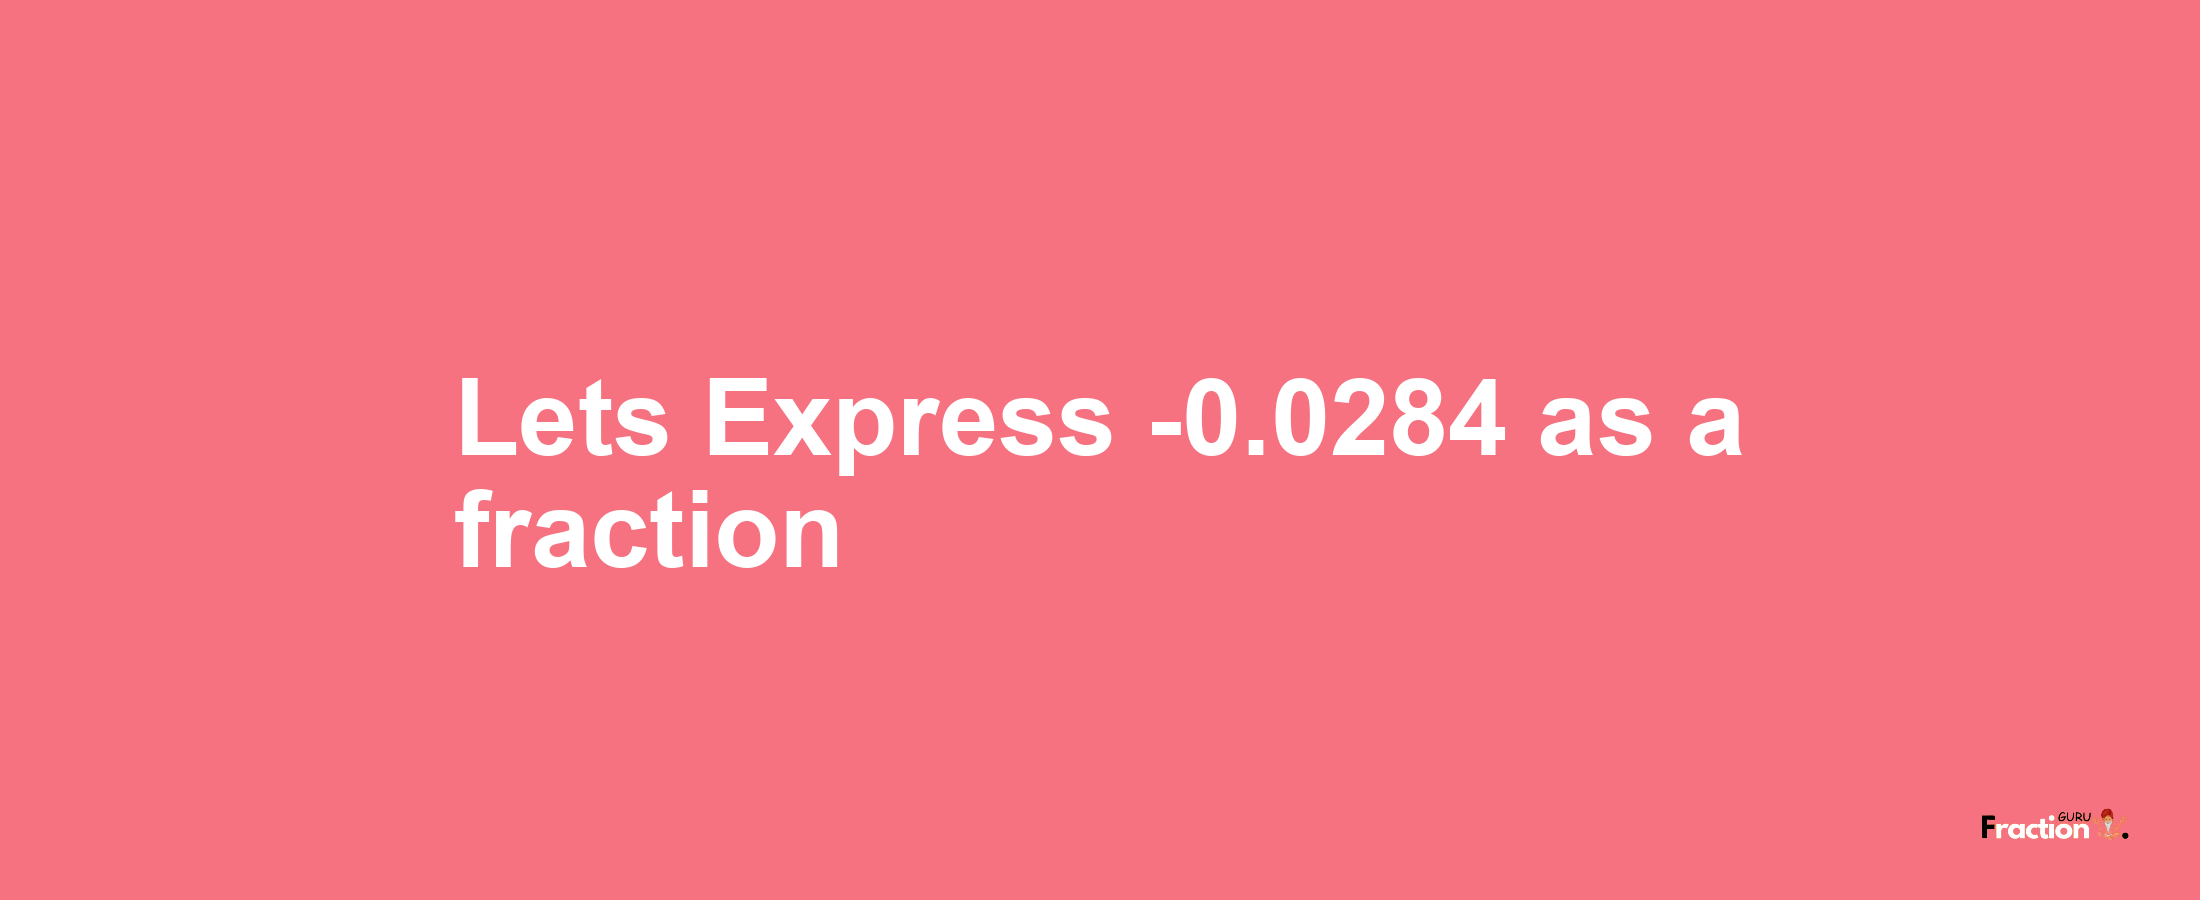 Lets Express -0.0284 as afraction